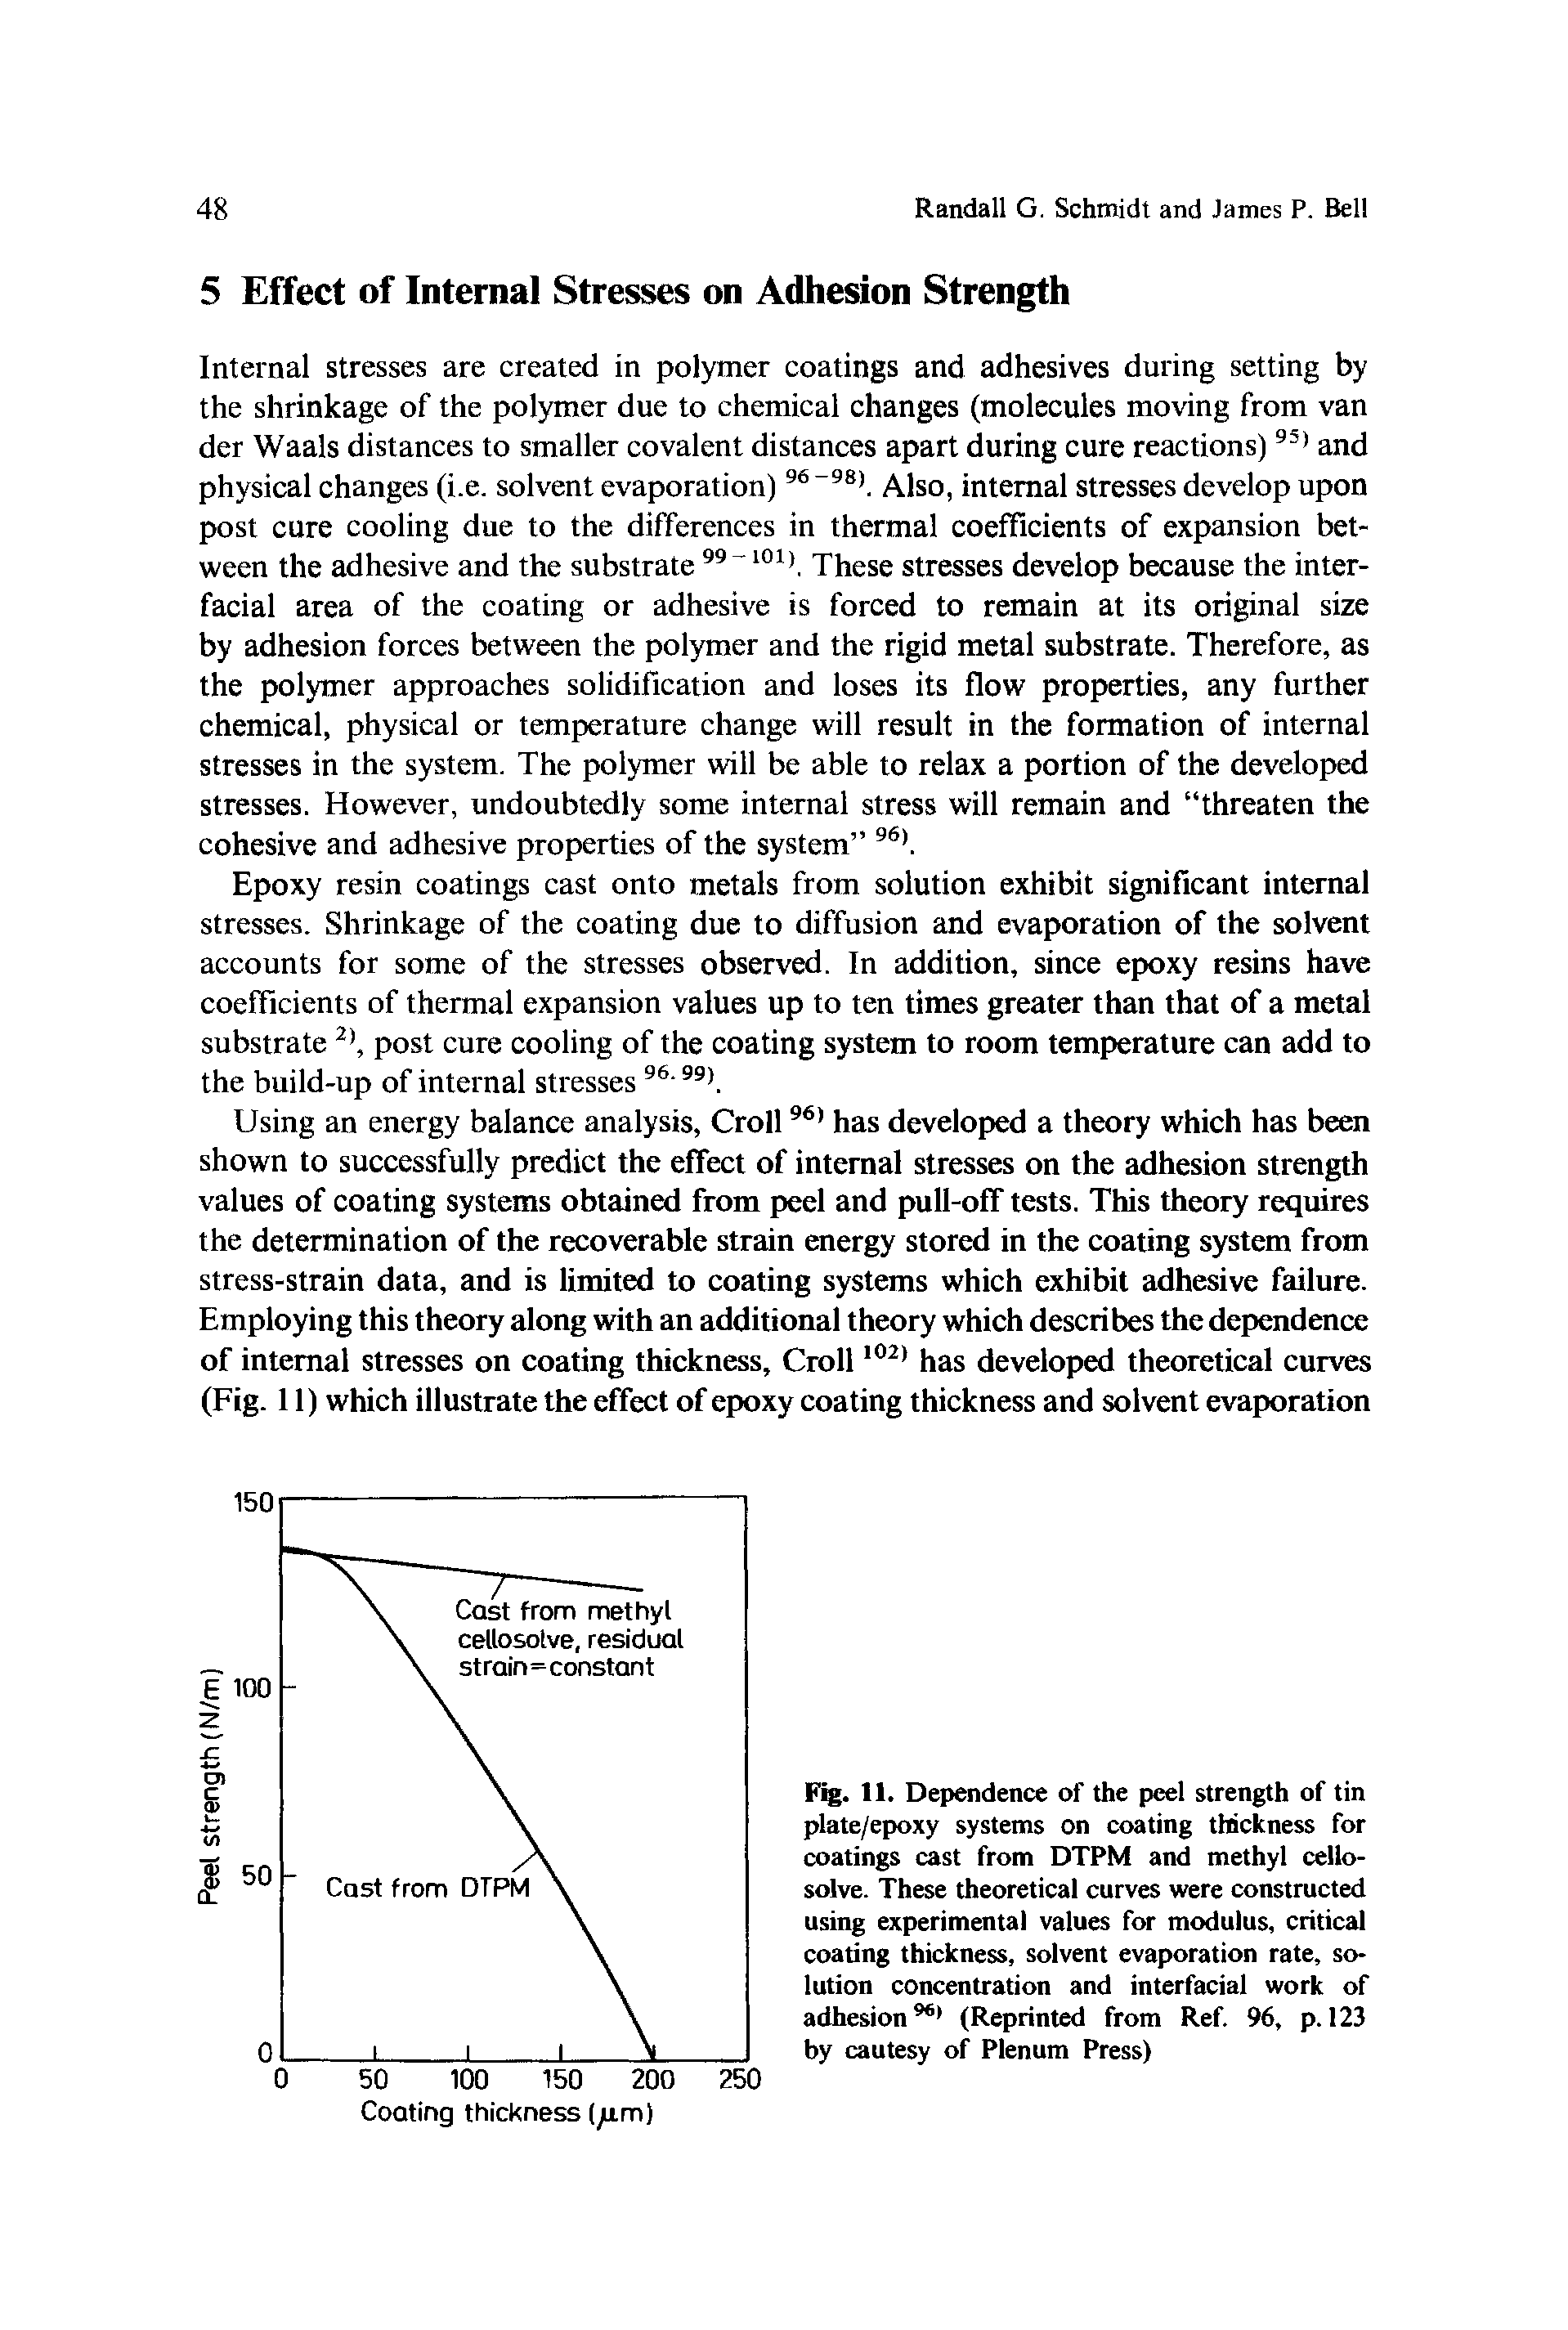 Fig. 11. Dependence of the peel strength of tin plate/epoxy systems on coating thickness for coatings cast from DTPM and methyl cello-solve. These theoretical curves were constructed using experimental values for modulus, critical coating thickness, solvent evaporation rate, solution concentration and interfacial work of adhesion96 (Reprinted from Ref. 96, p. 123 by cautesy of Plenum Press)...